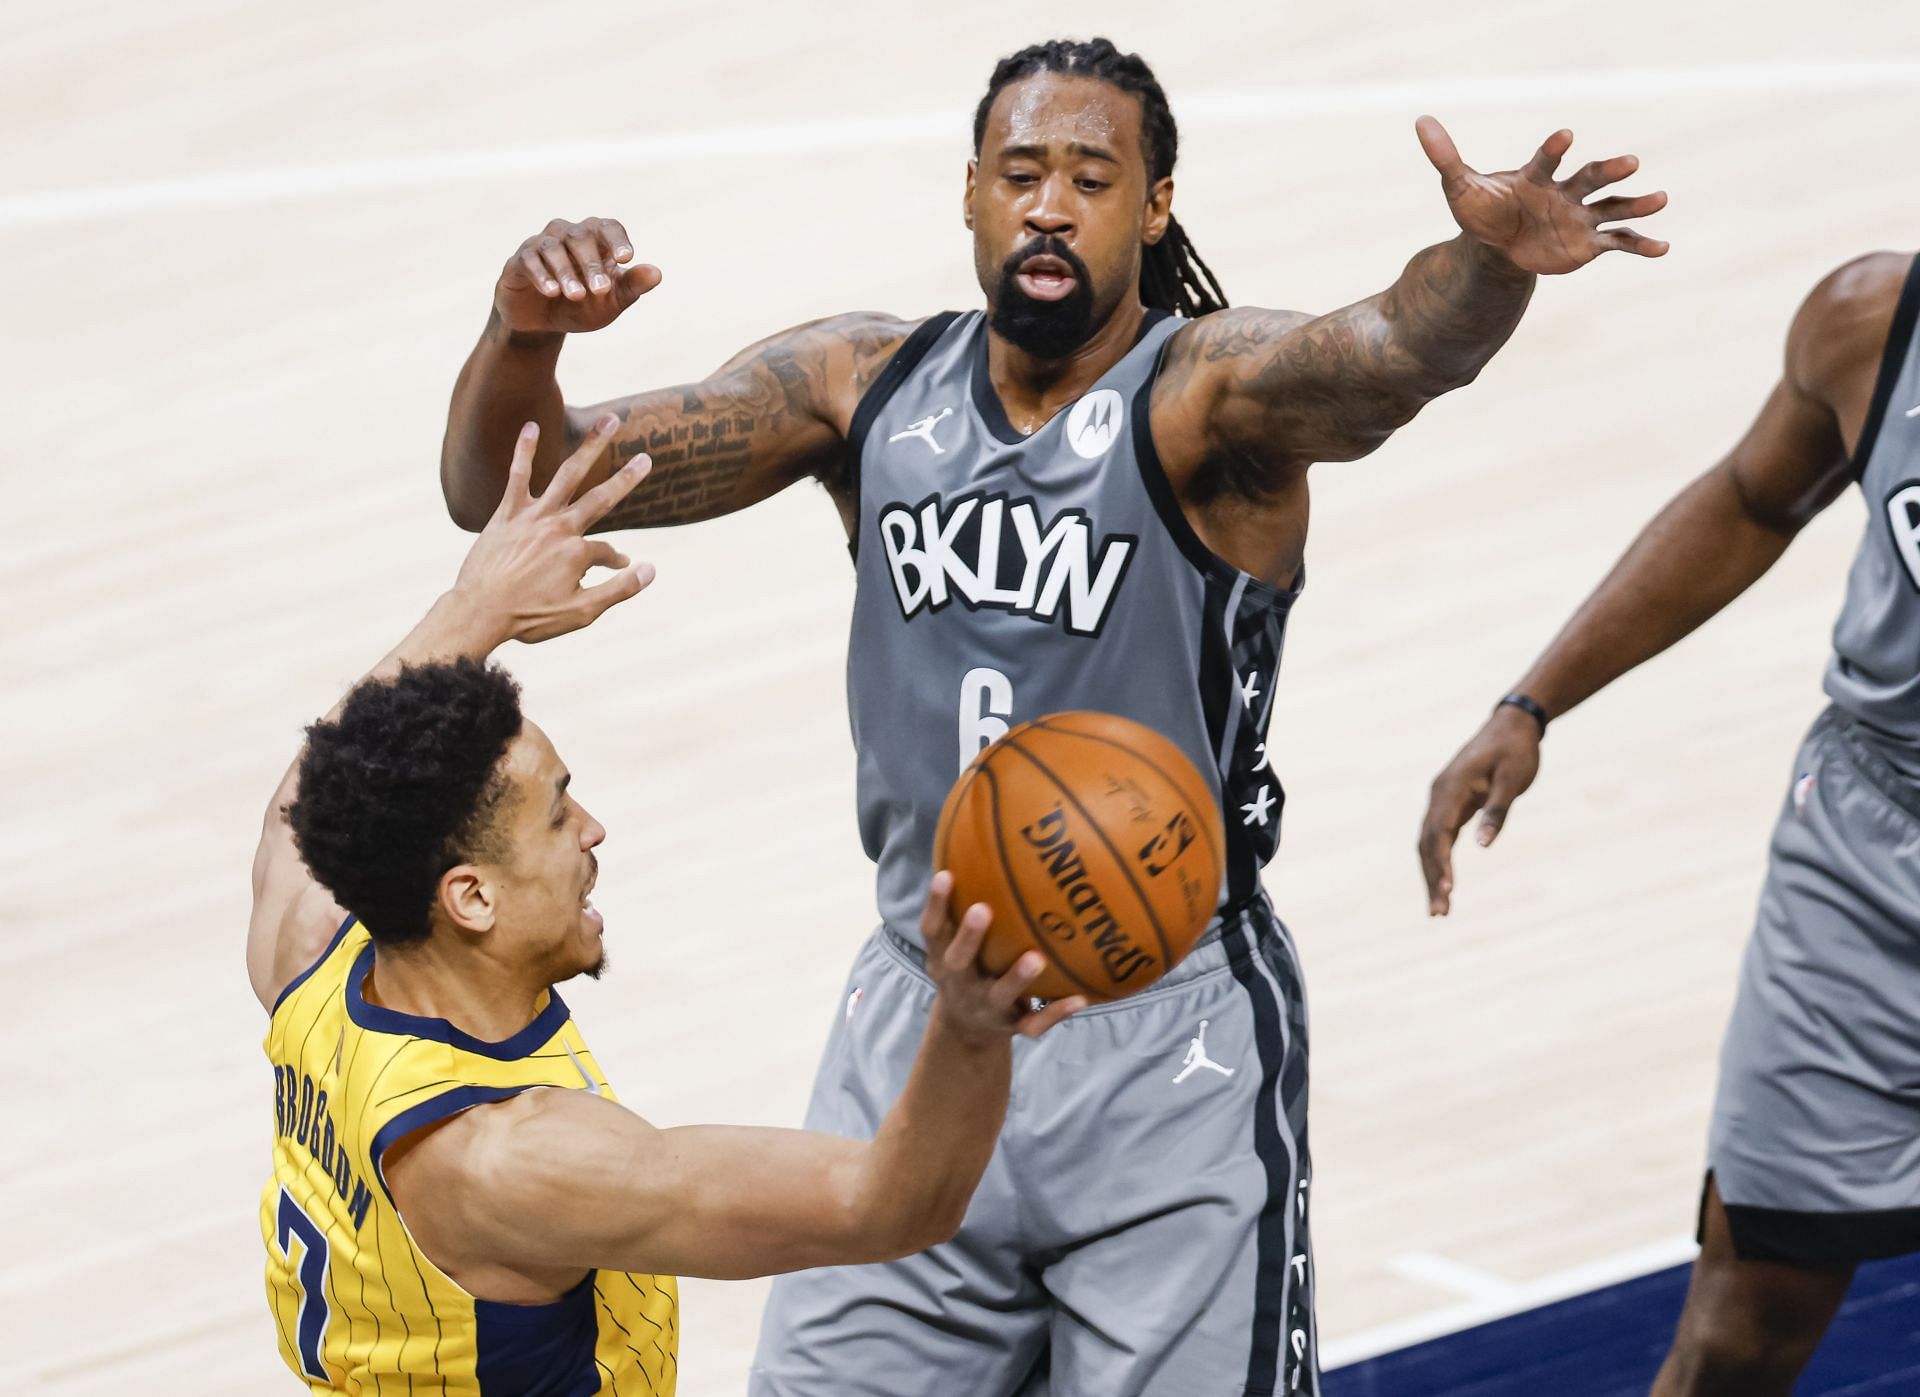 Malcolm Brogdon (#7) of the Indiana Pacers passes the ball around DeAndre Jordan (#6) of the Brooklyn Nets